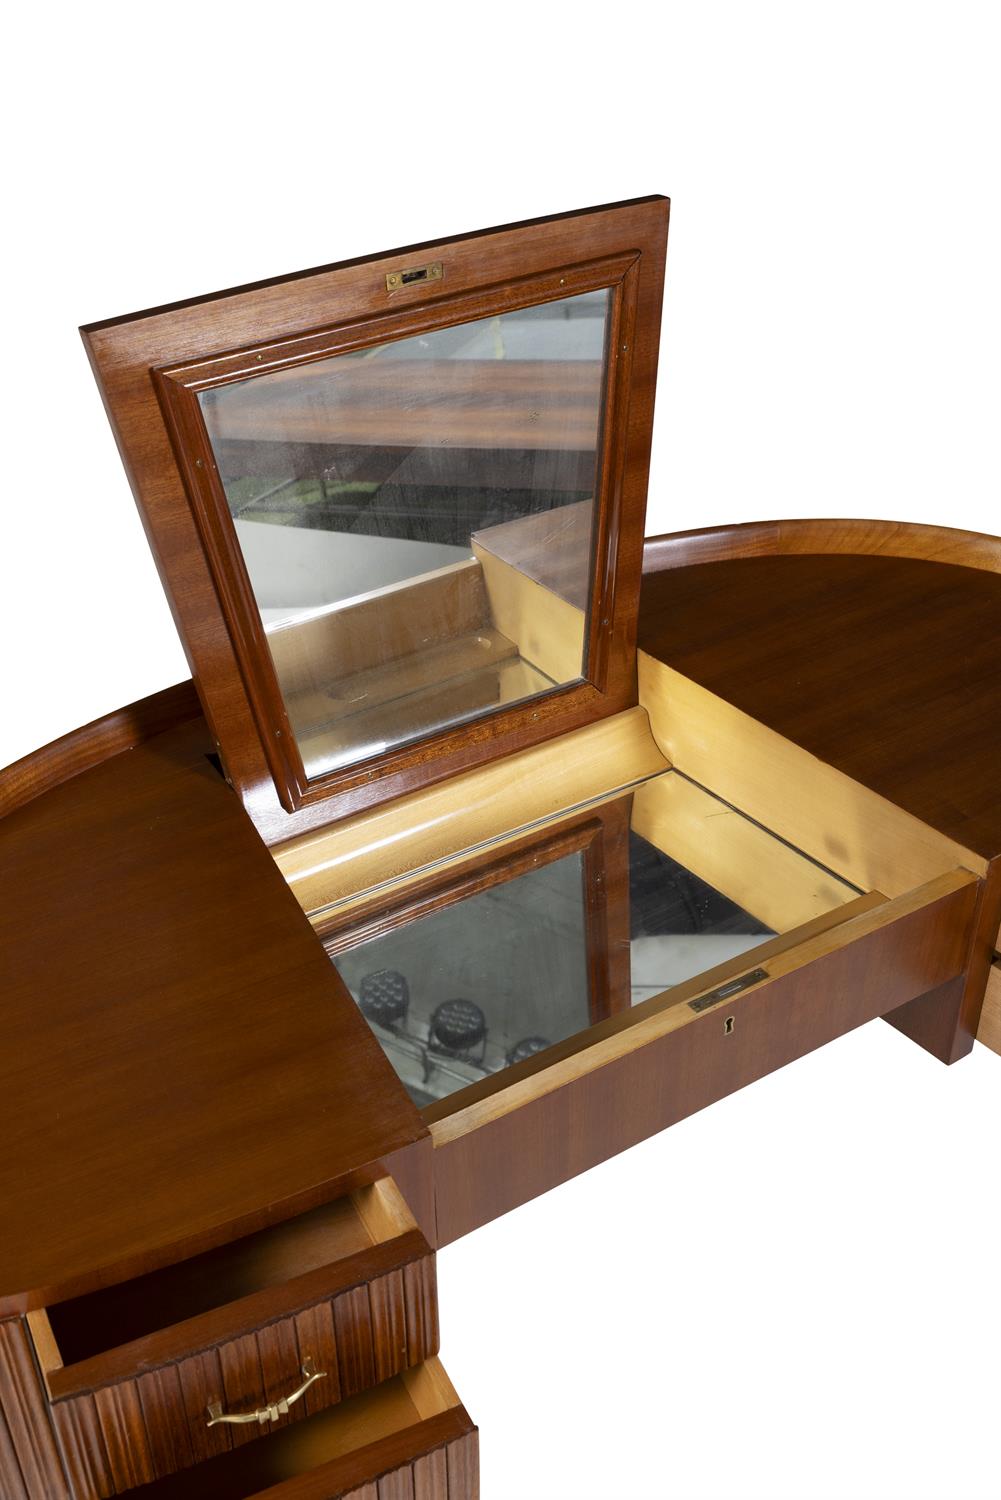 PAOLO BUFFA (1903 - 1970) A mahogany dressing table by Paolo Buffa for Ducrot with maple interior - Image 7 of 10